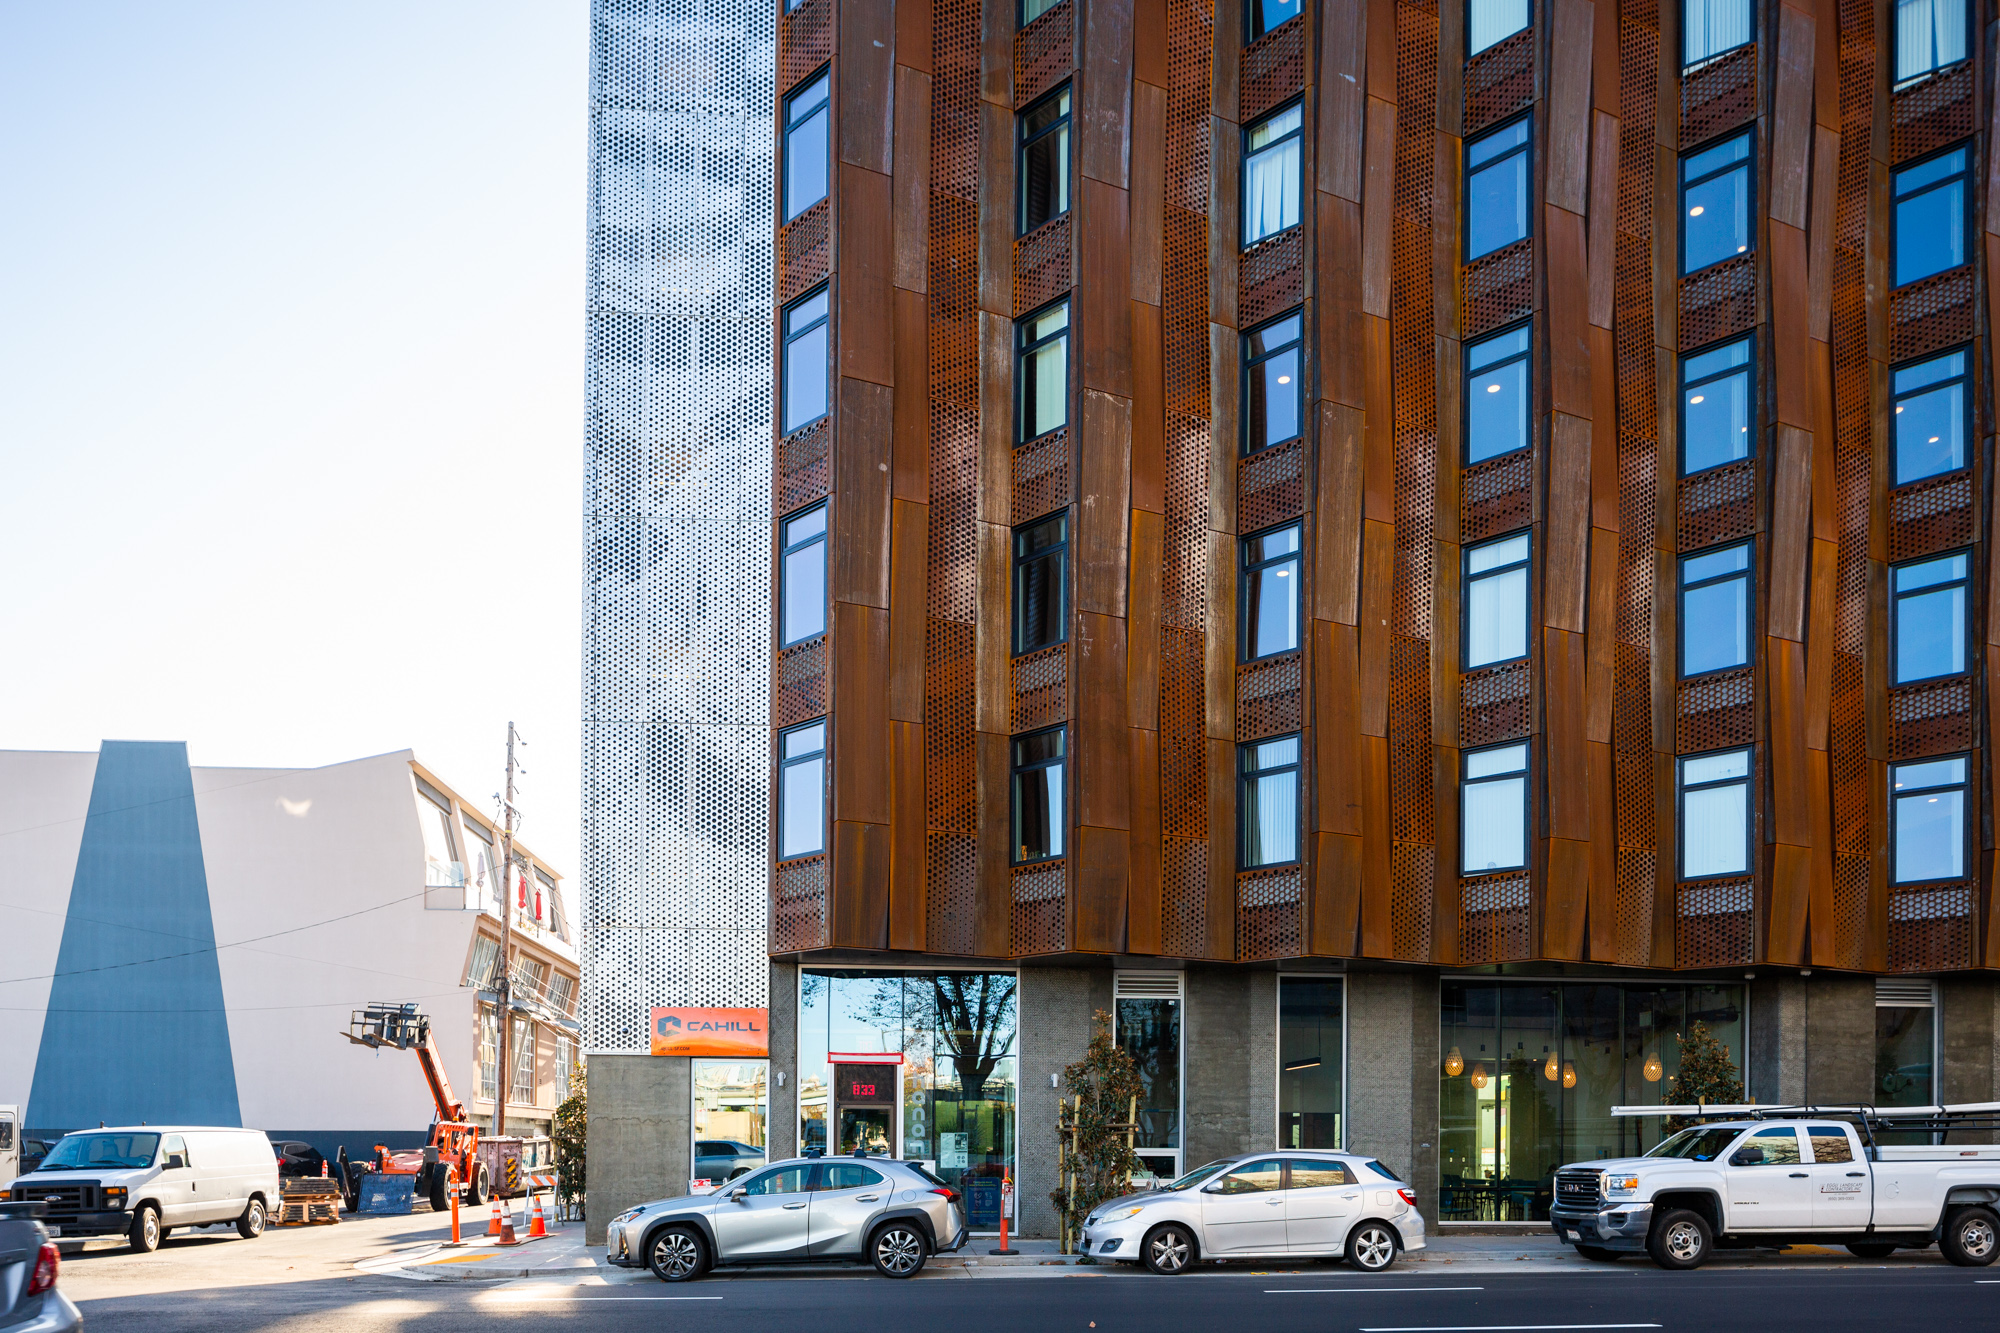 833 Bryant Street facade elevtion, showcasing the perforated pattern which evokes the rife field terraces in the Philippine, image by Andrew Campbell Nelson